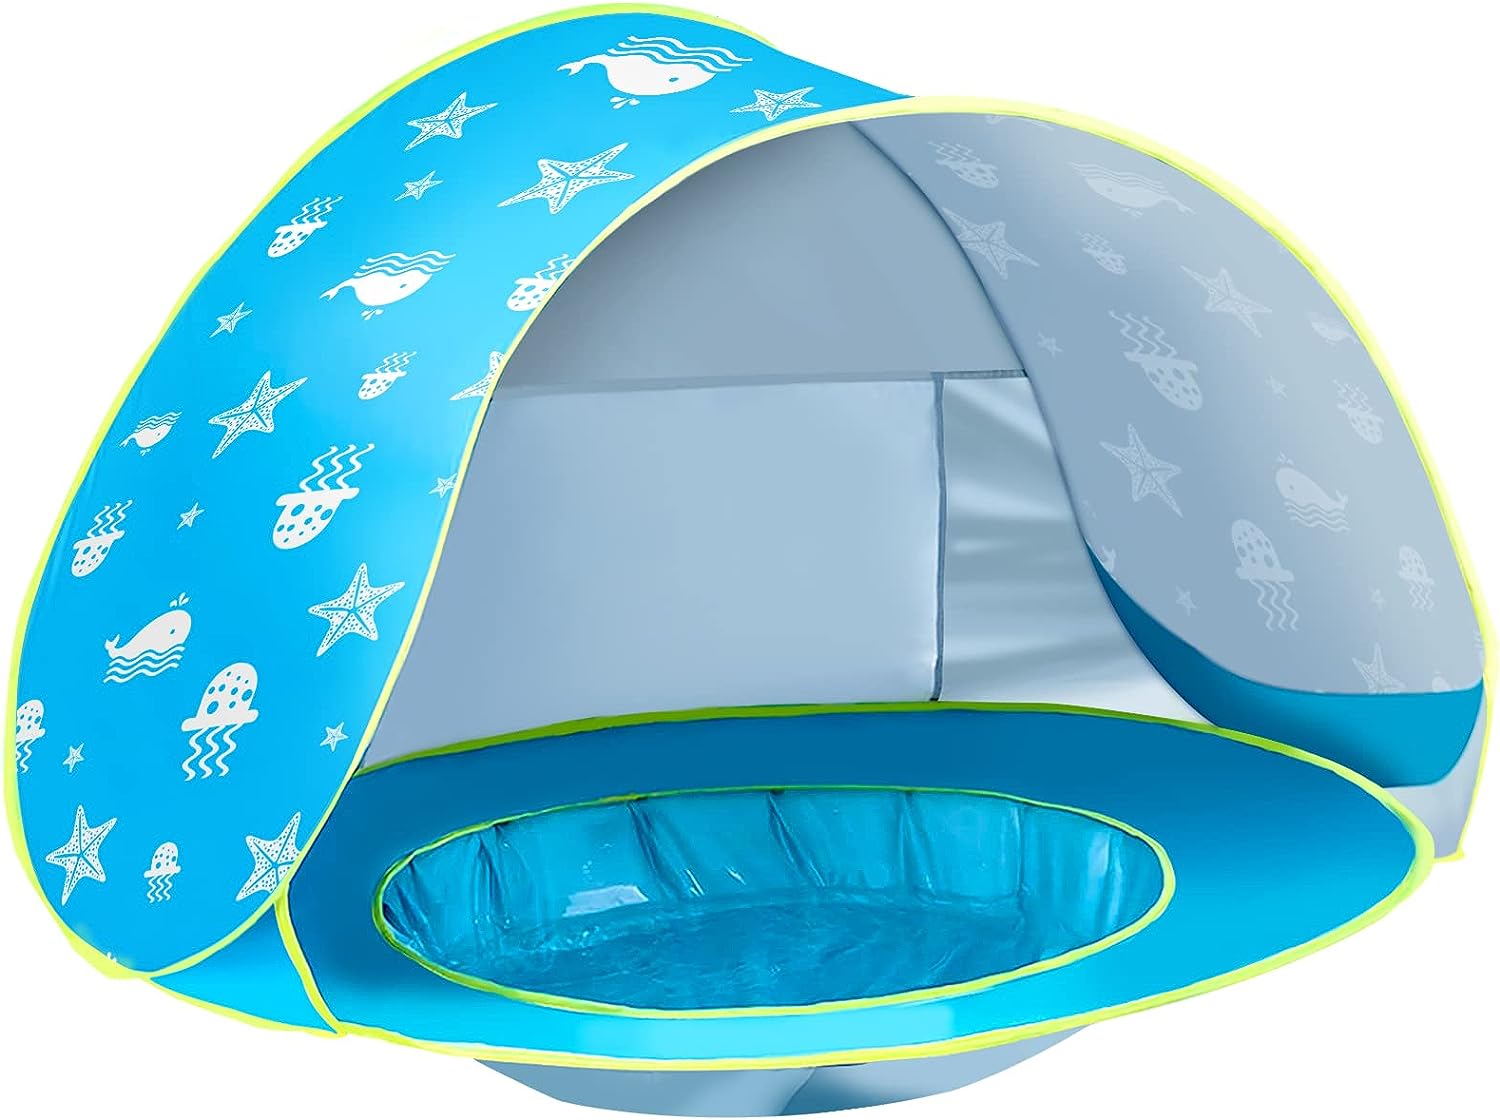 GeerWest Beach Tent Toddlers Pool Tents Pop Up Portable Toys Sun shelter UV Protection Shade for Infant with Carry Bag (Blue) Review